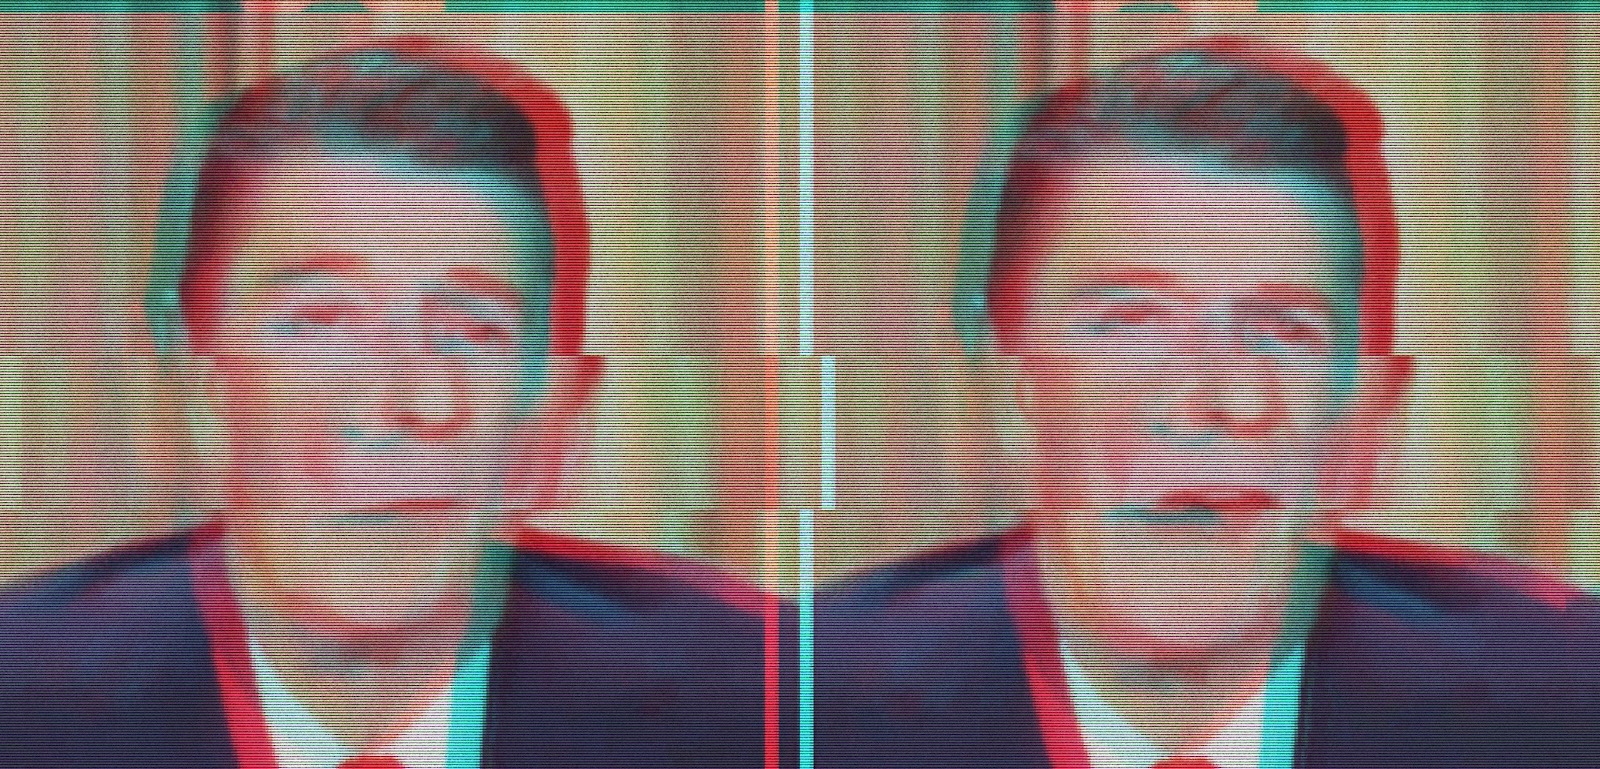 Distorted image of Ronald Reagan on TV